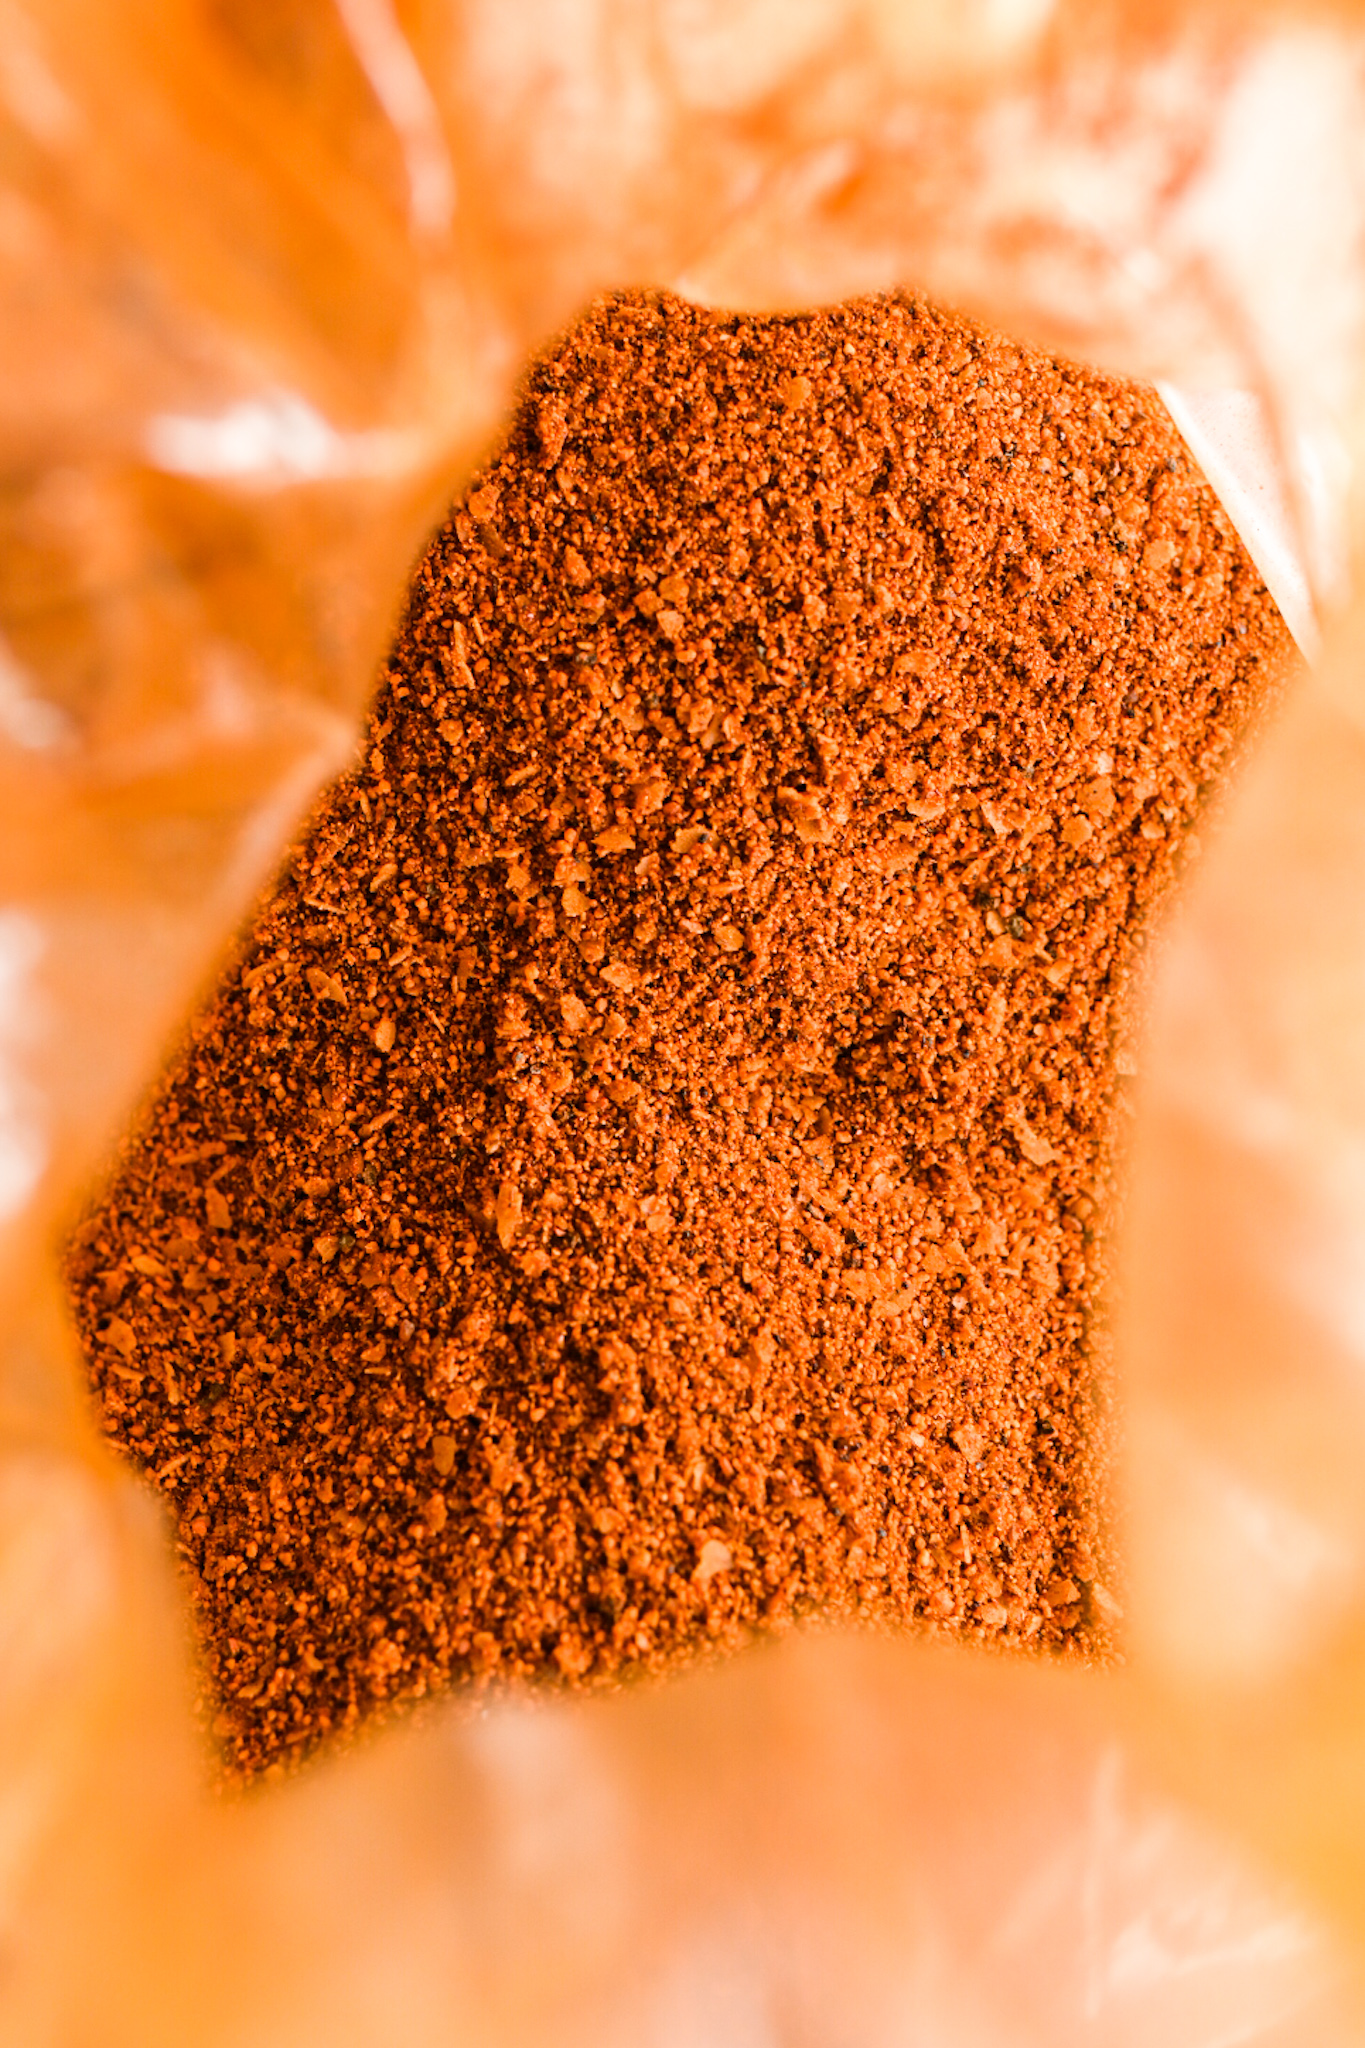 Pork Mafia spice mix for Hog Dat Nation's barbecue competition entries